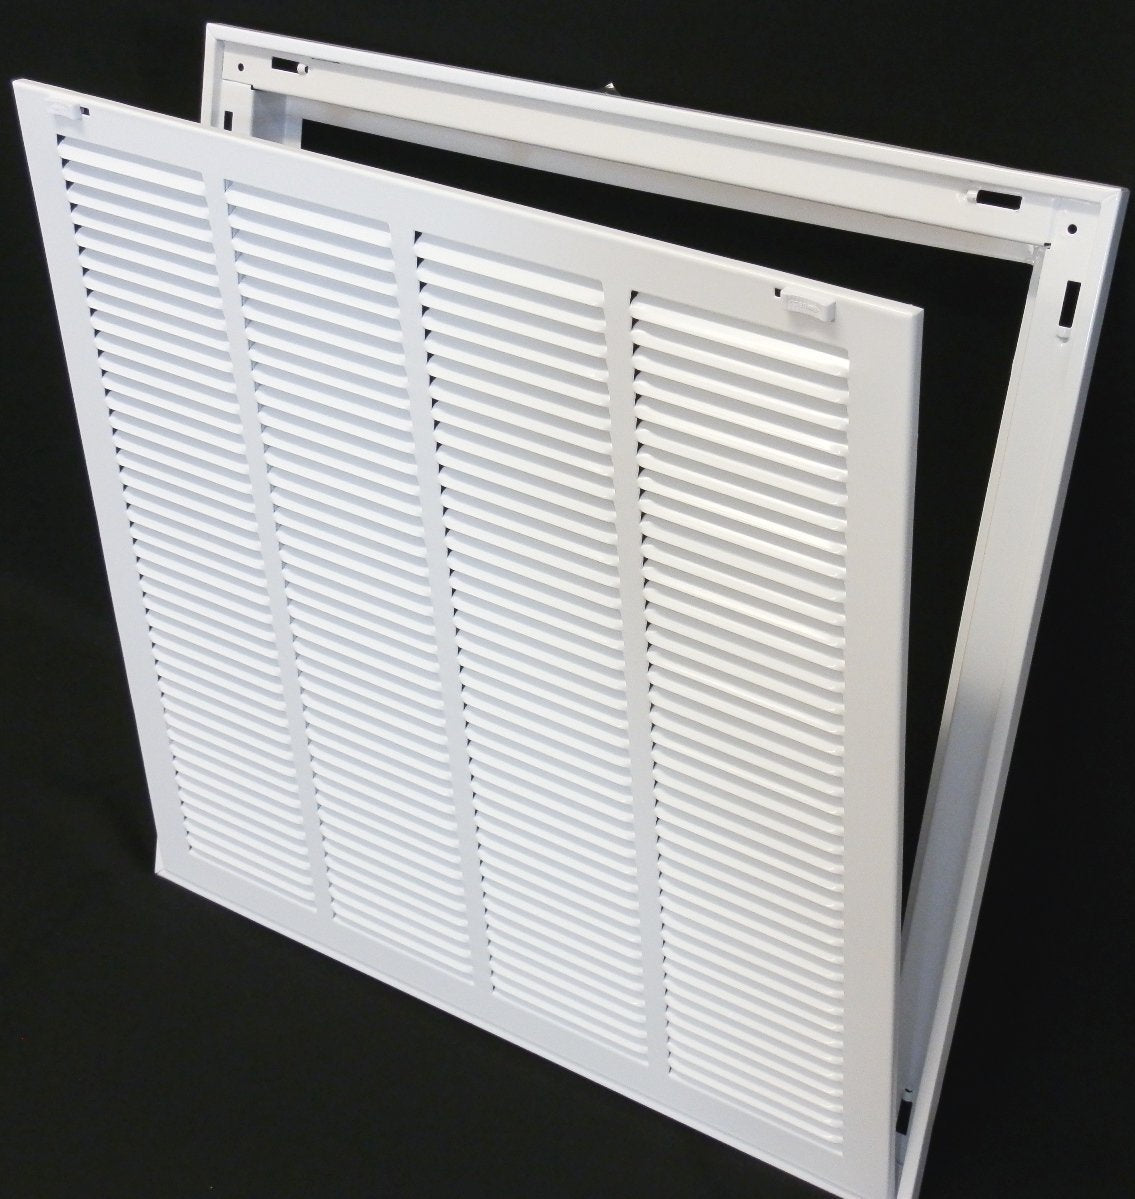 34&quot; X 36&quot; Steel Return Air Filter Grille for 1&quot; Filter - Removable Frame - [Outer Dimensions: 36 5/8&quot; X 38 5/8&quot;]